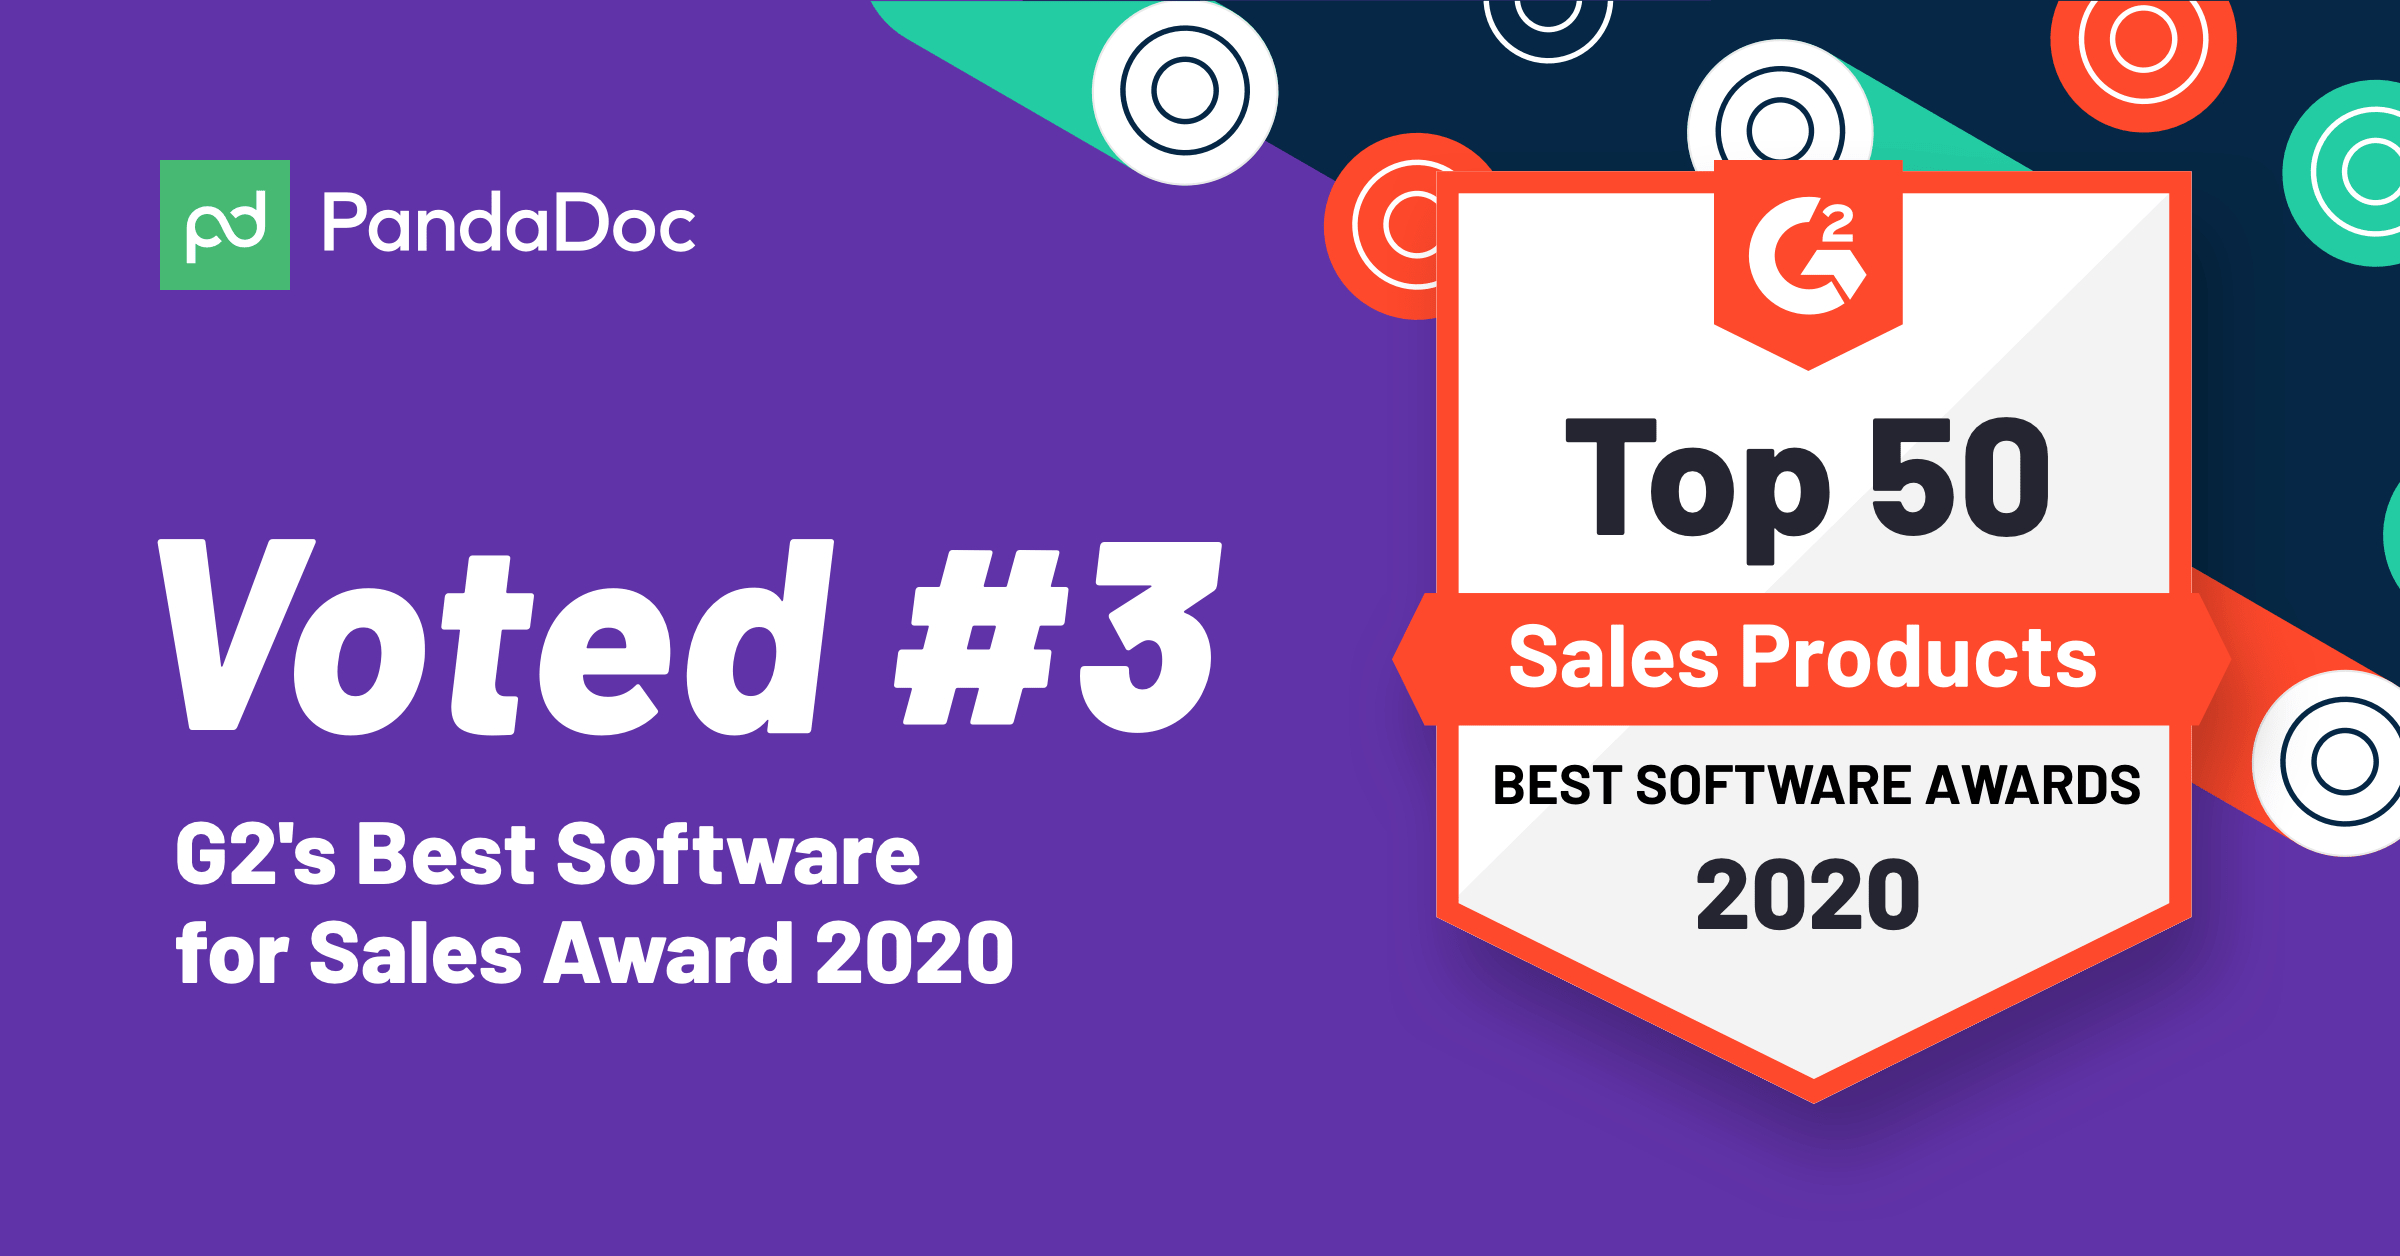 PandaDoc receives 3 best software 2020 awards from G2